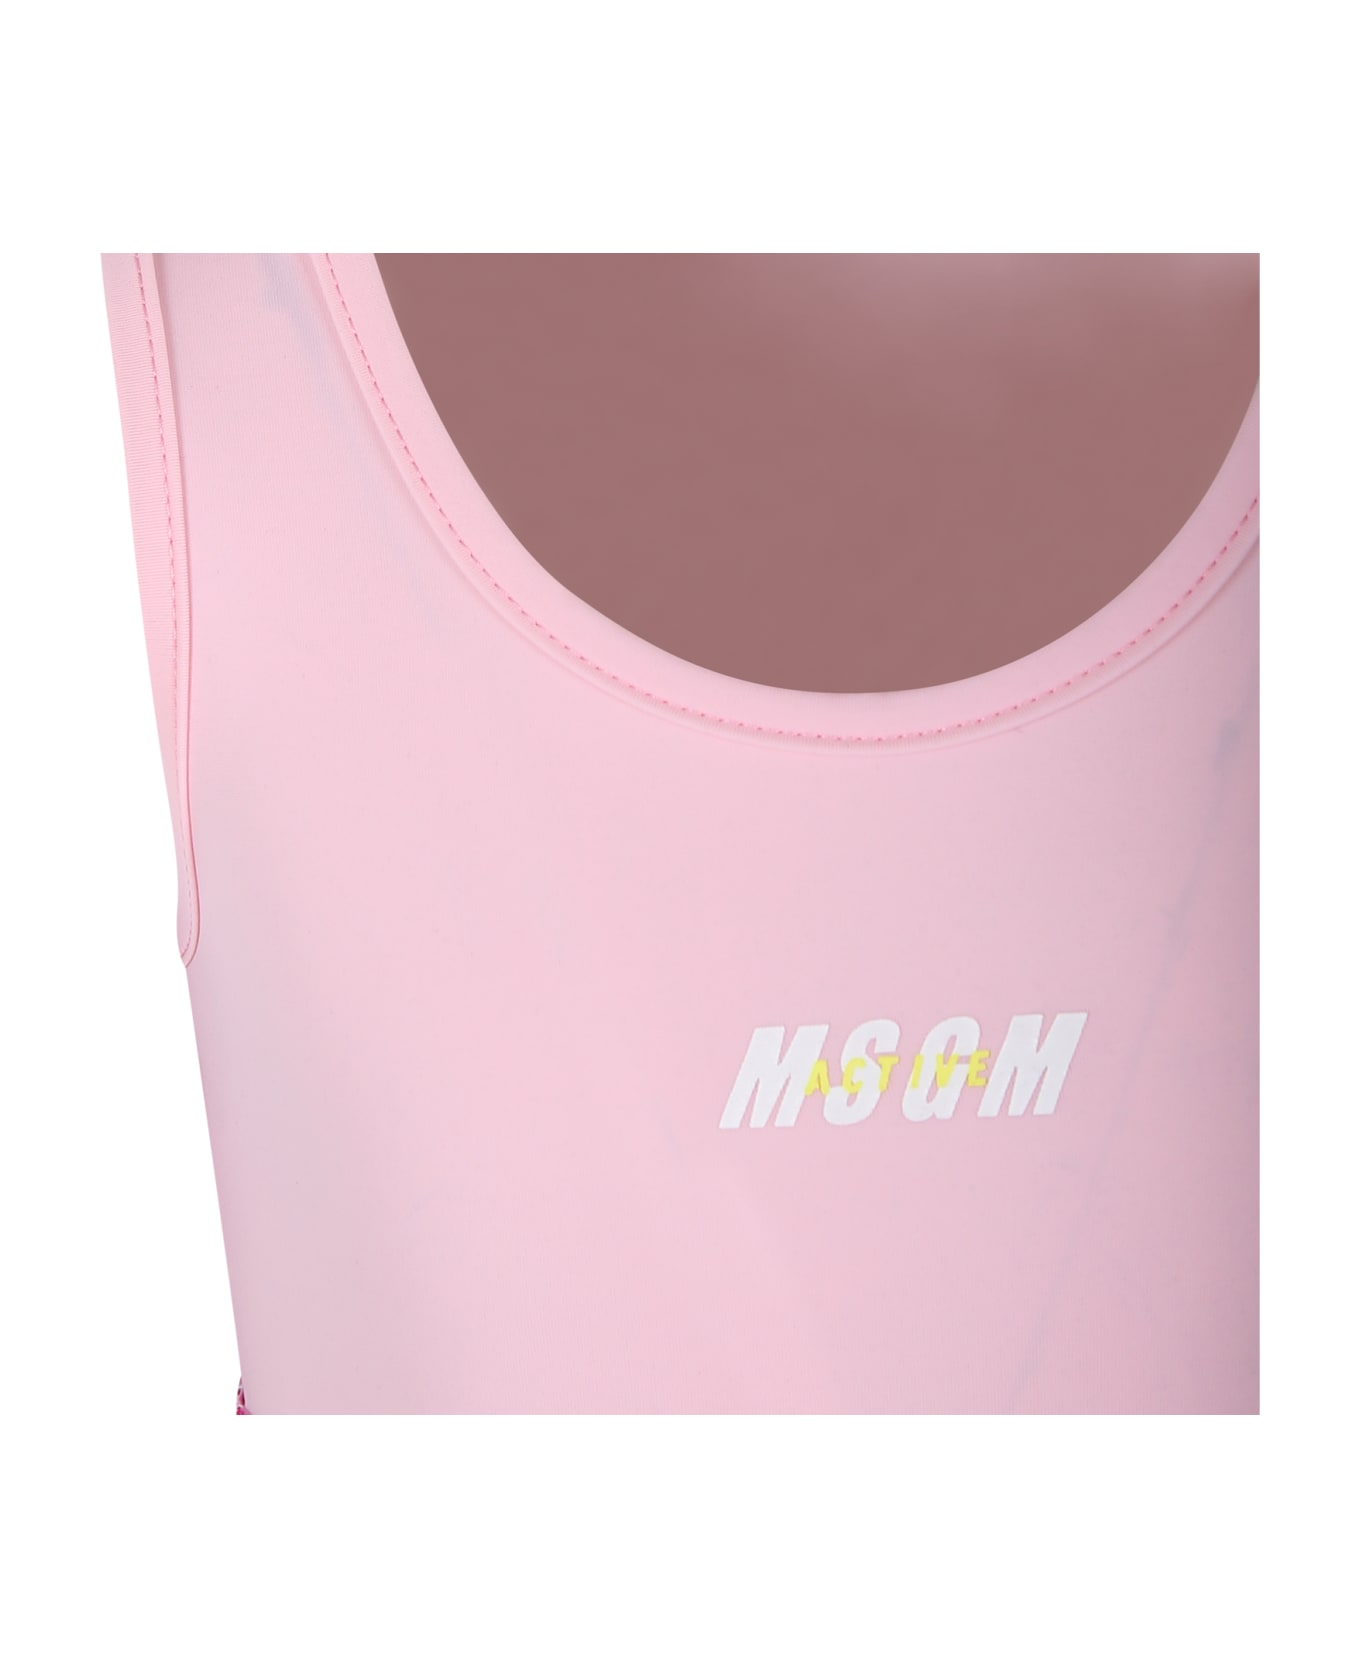 MSGM Pink Crop Top For Girl With Logo - Pink